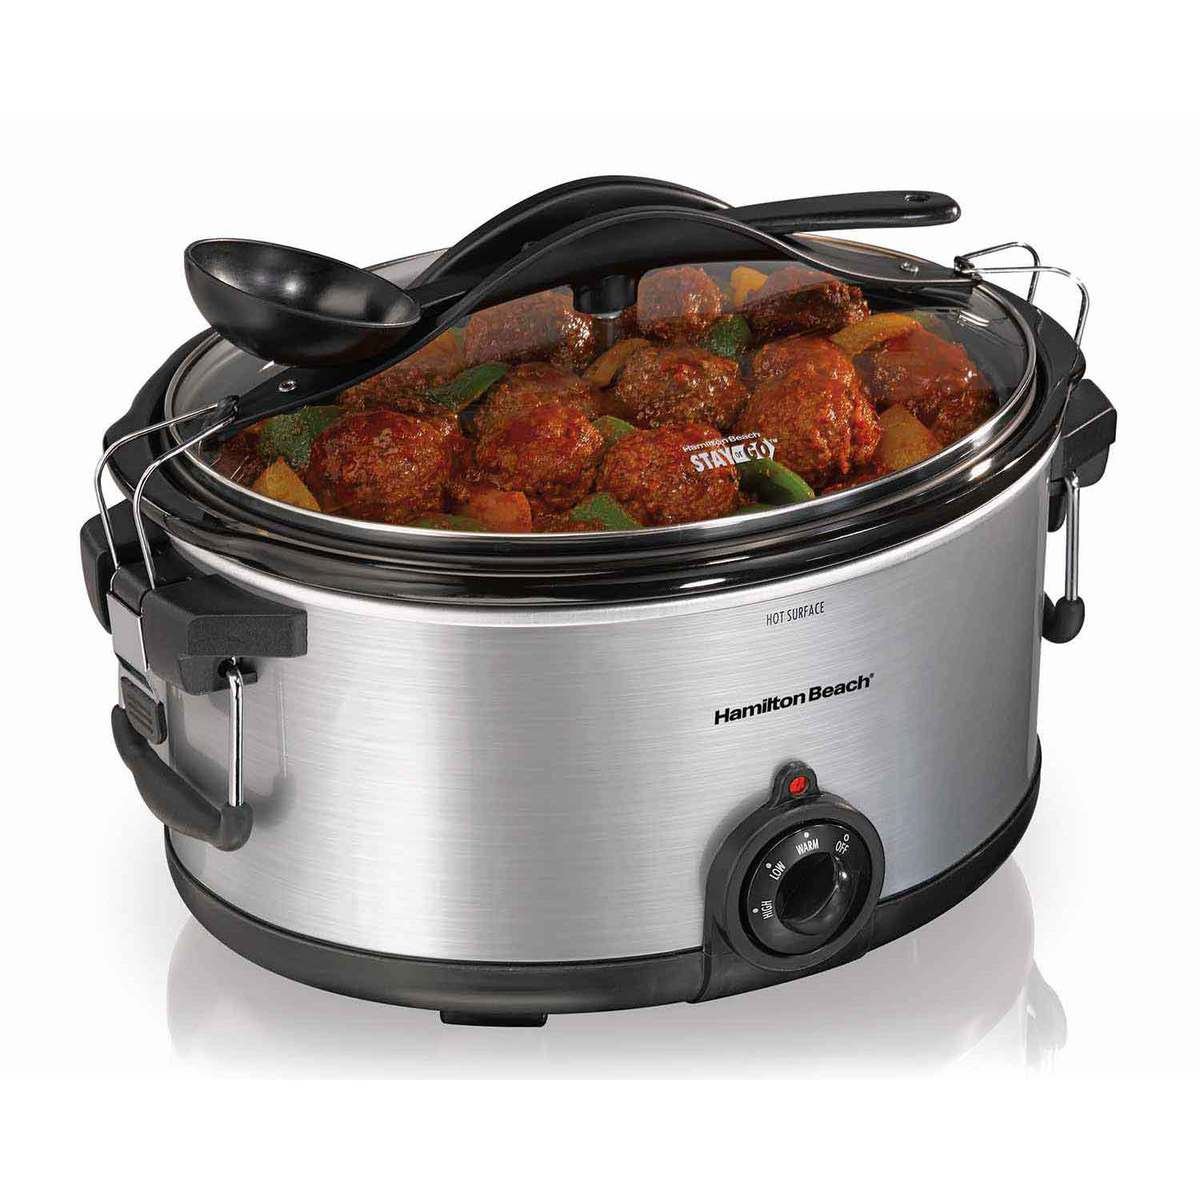 Stay or Go® 6 Qt. Deluxe Slow Cooker (33165)